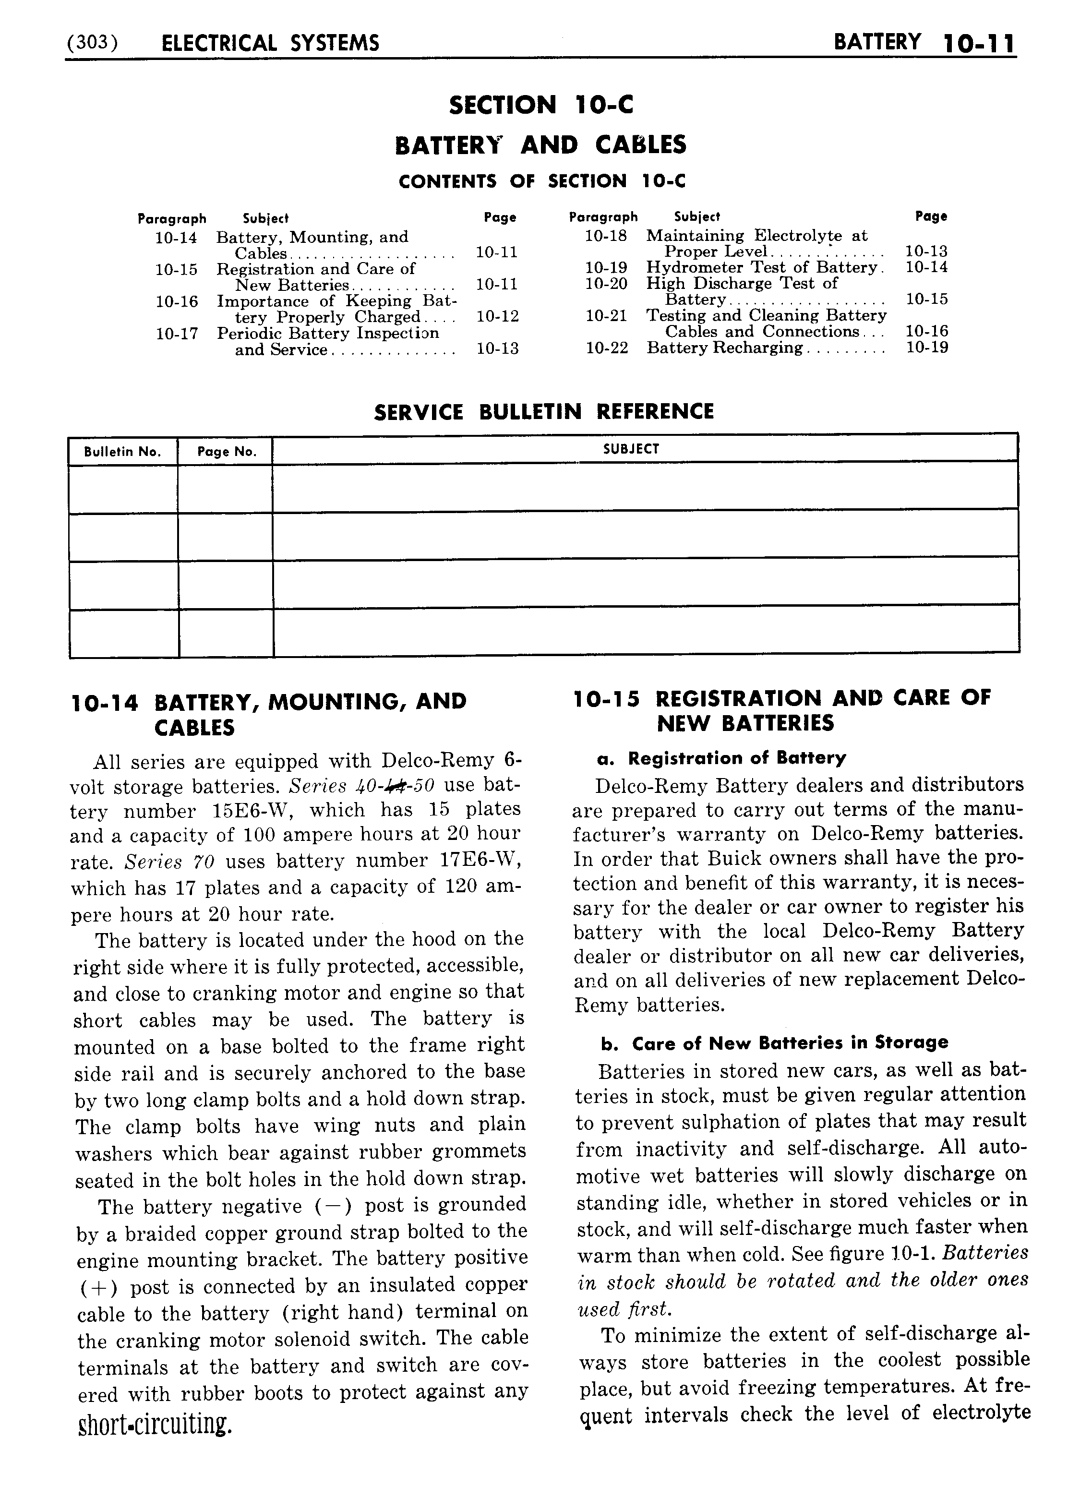 n_11 1951 Buick Shop Manual - Electrical Systems-011-011.jpg